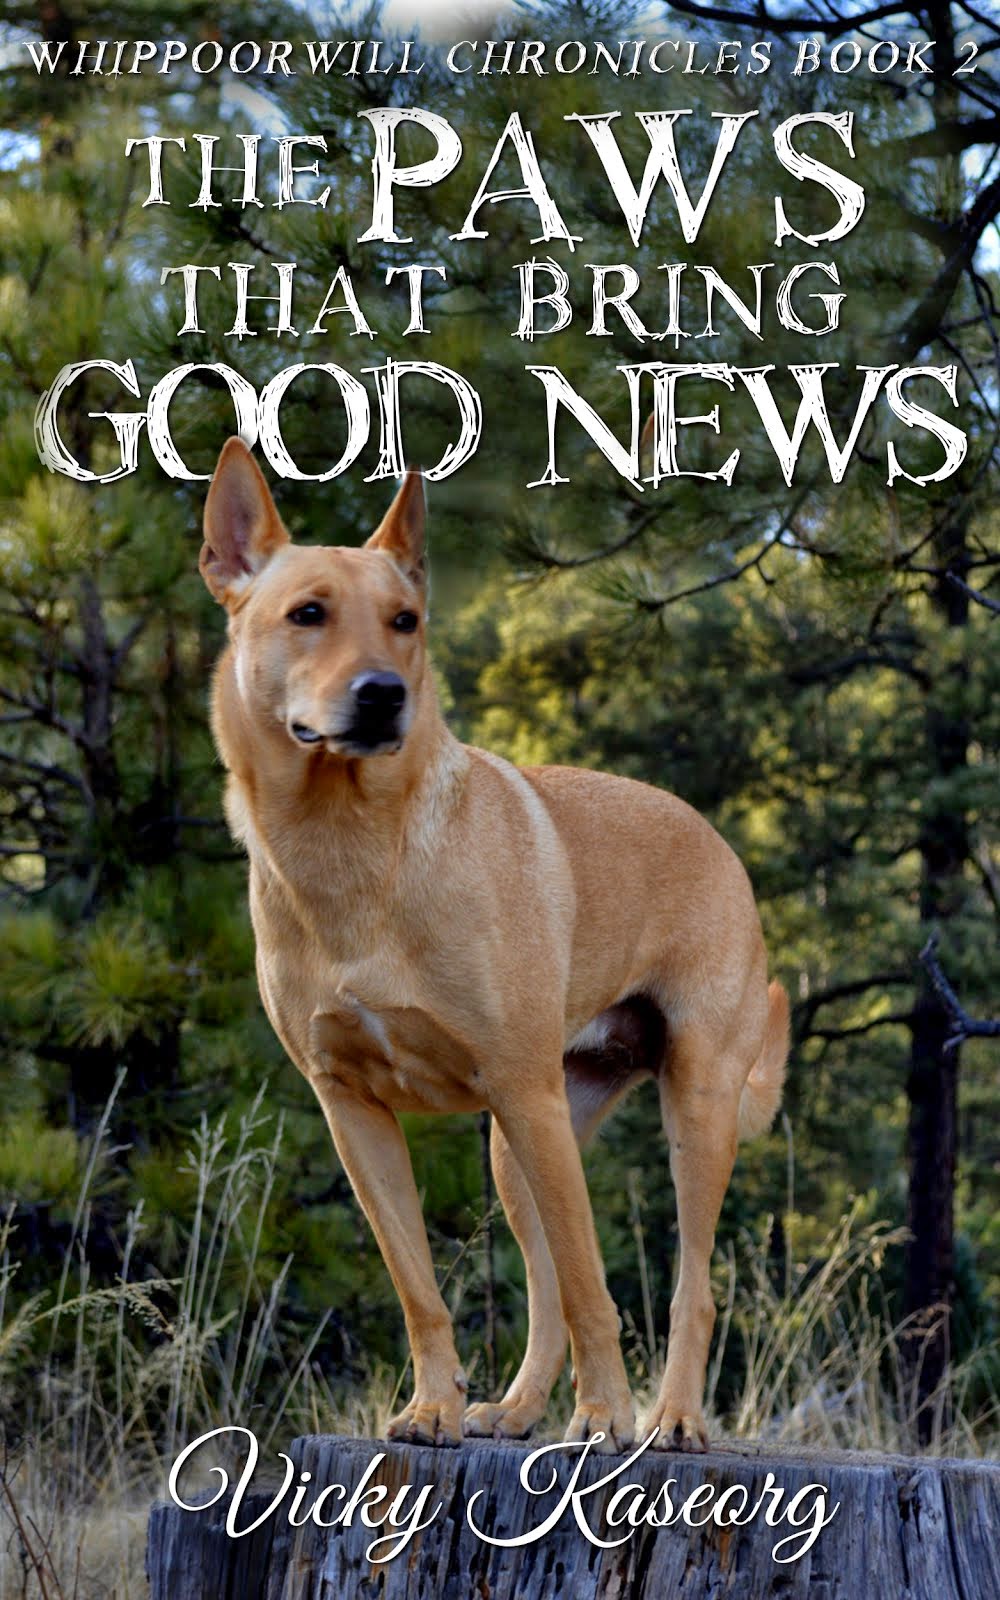 The Paws That Bring Good News